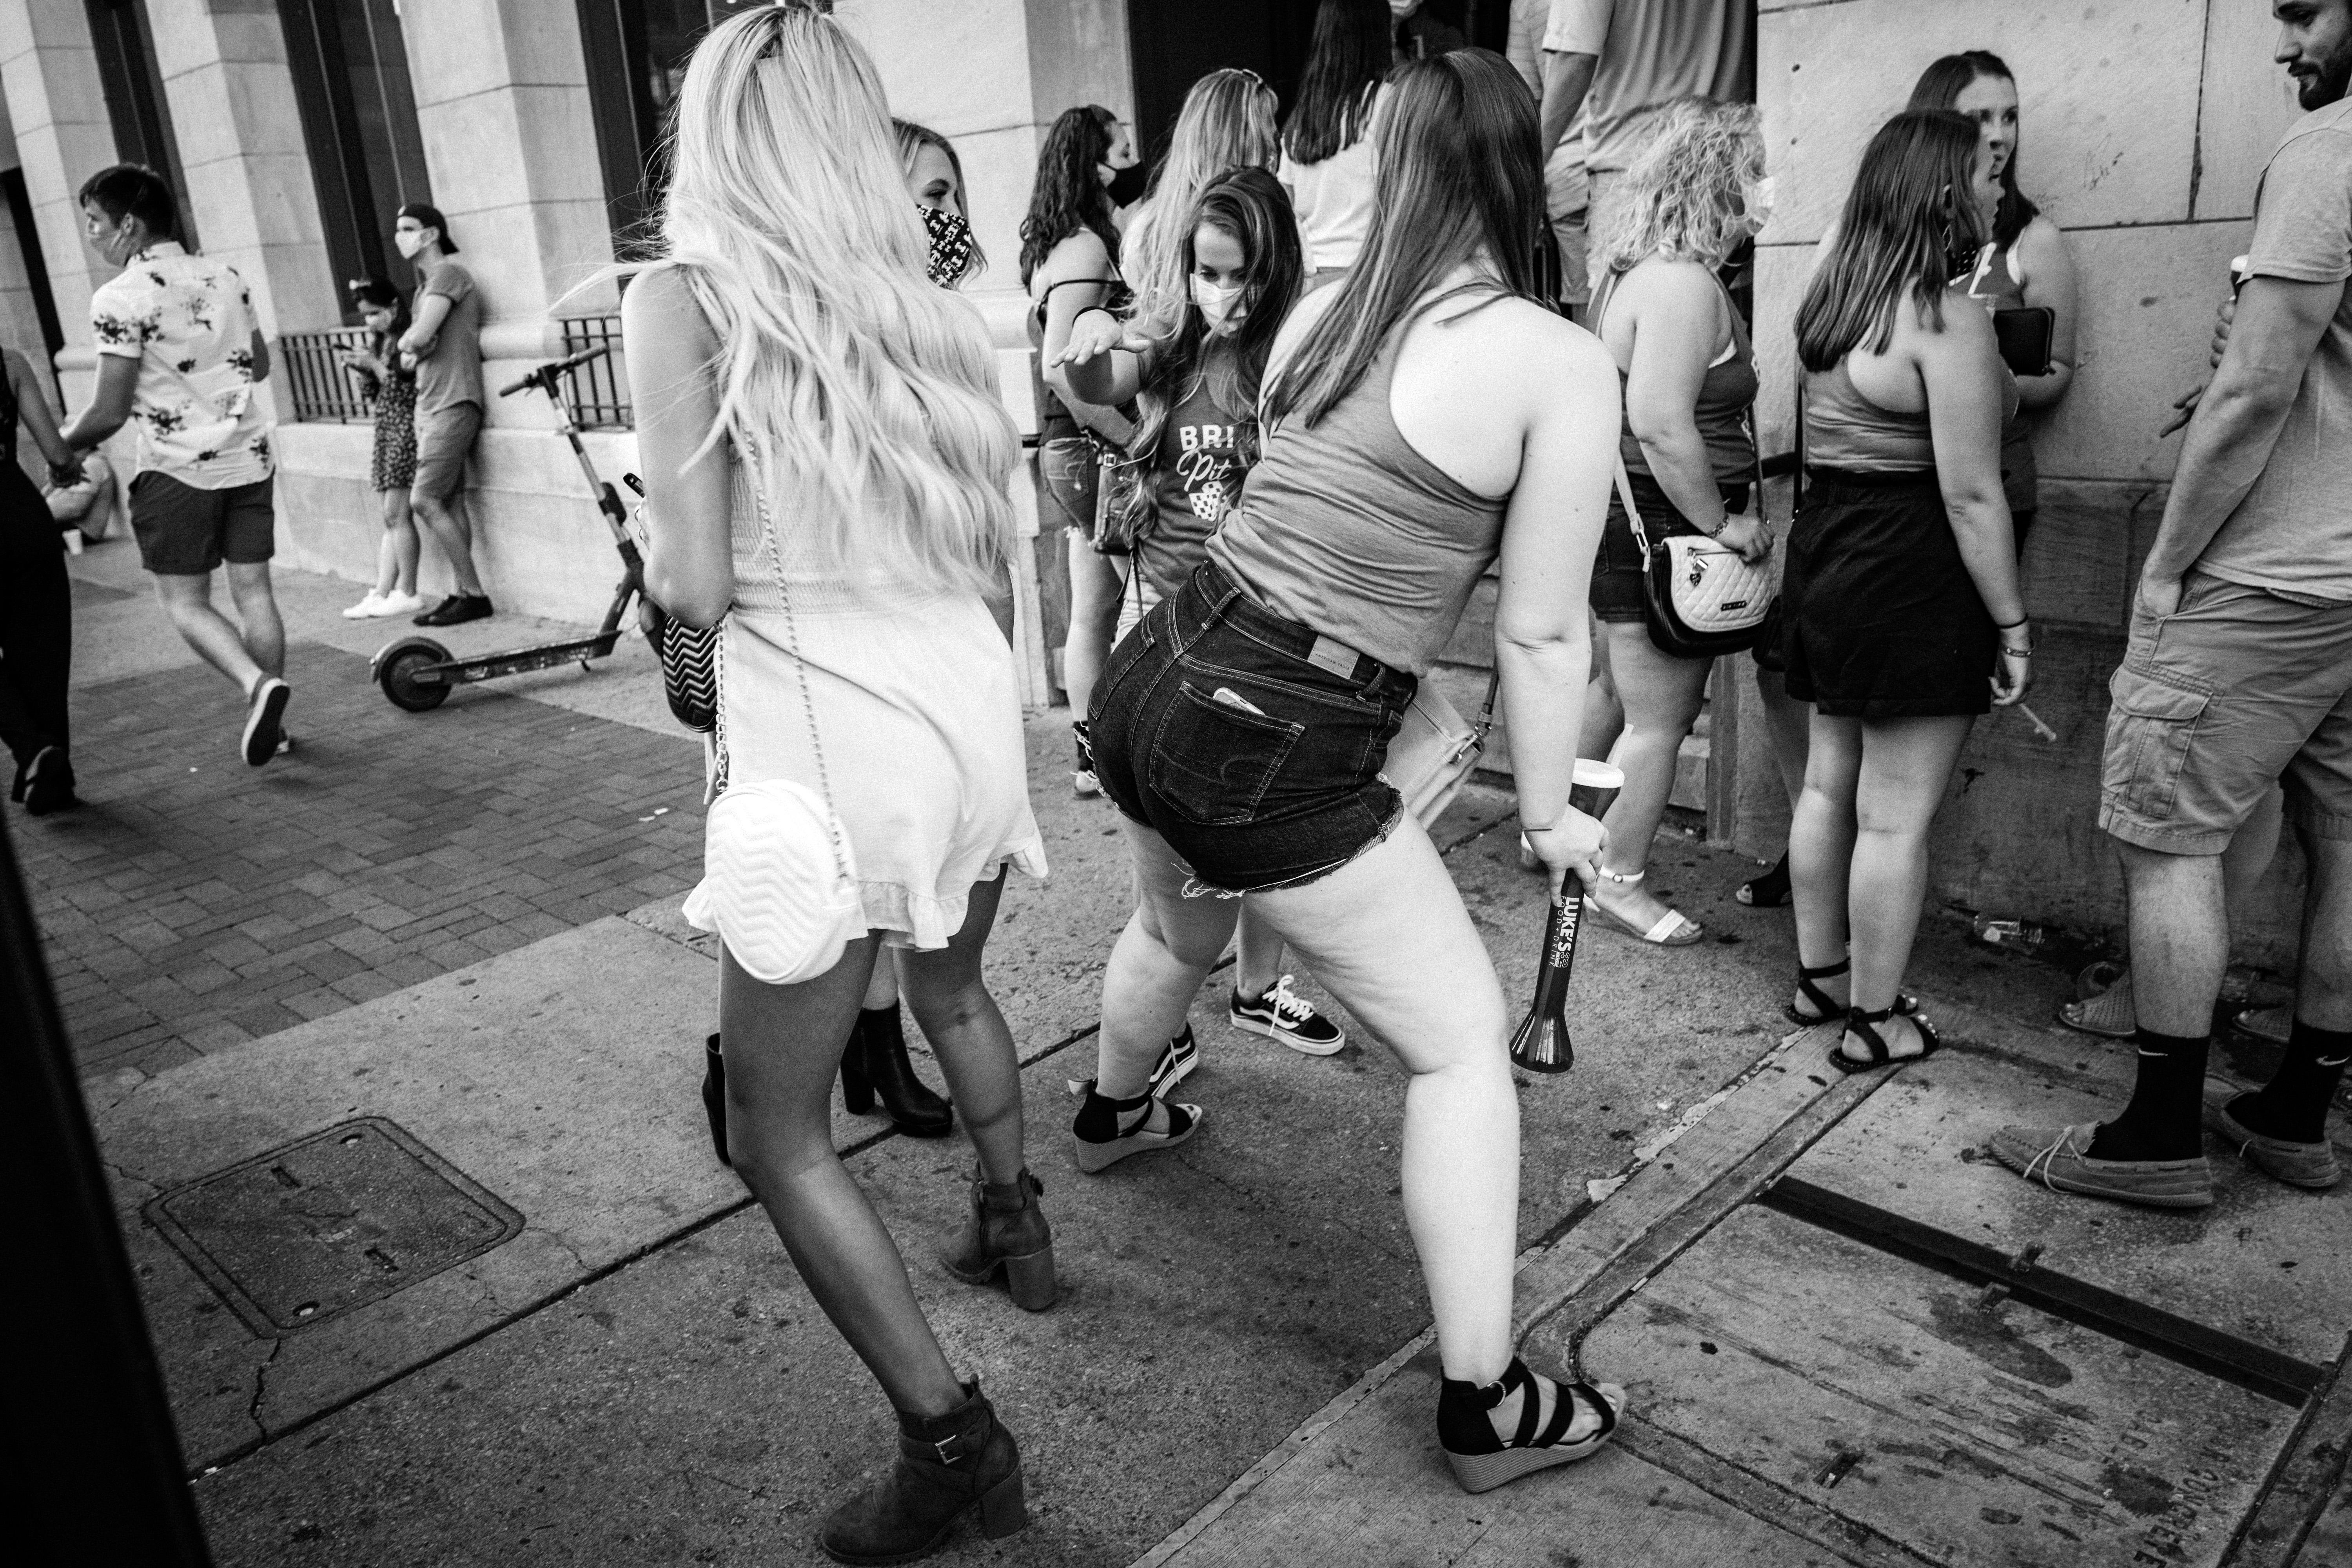 A black-and-white photo shows women holding drinks dancing together on the sidewalk.